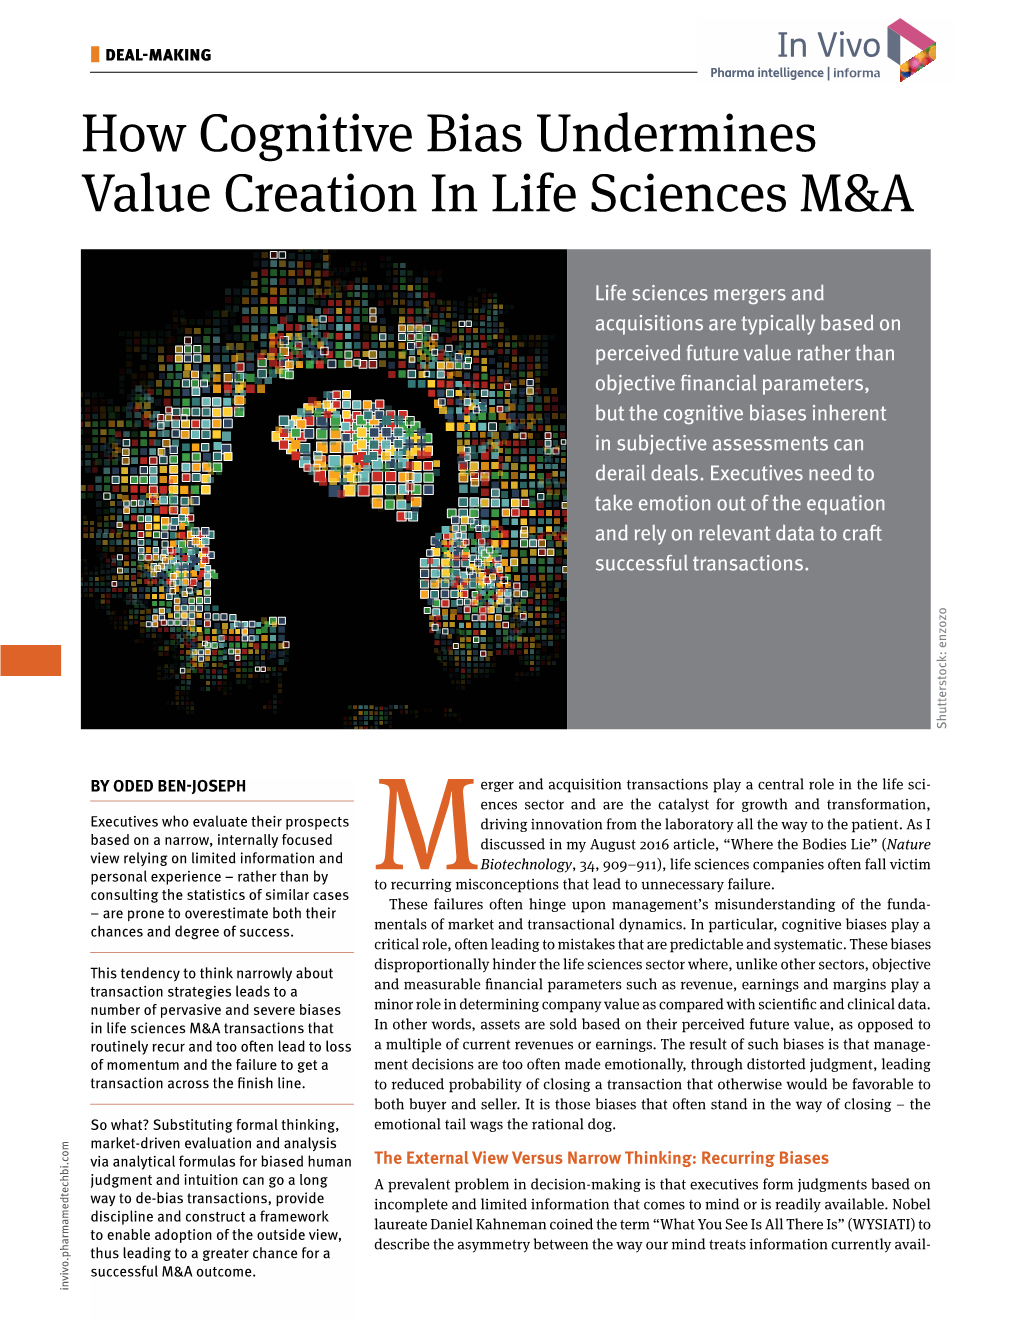 How Cognitive Bias Undermines Value Creation in Life Sciences M&A